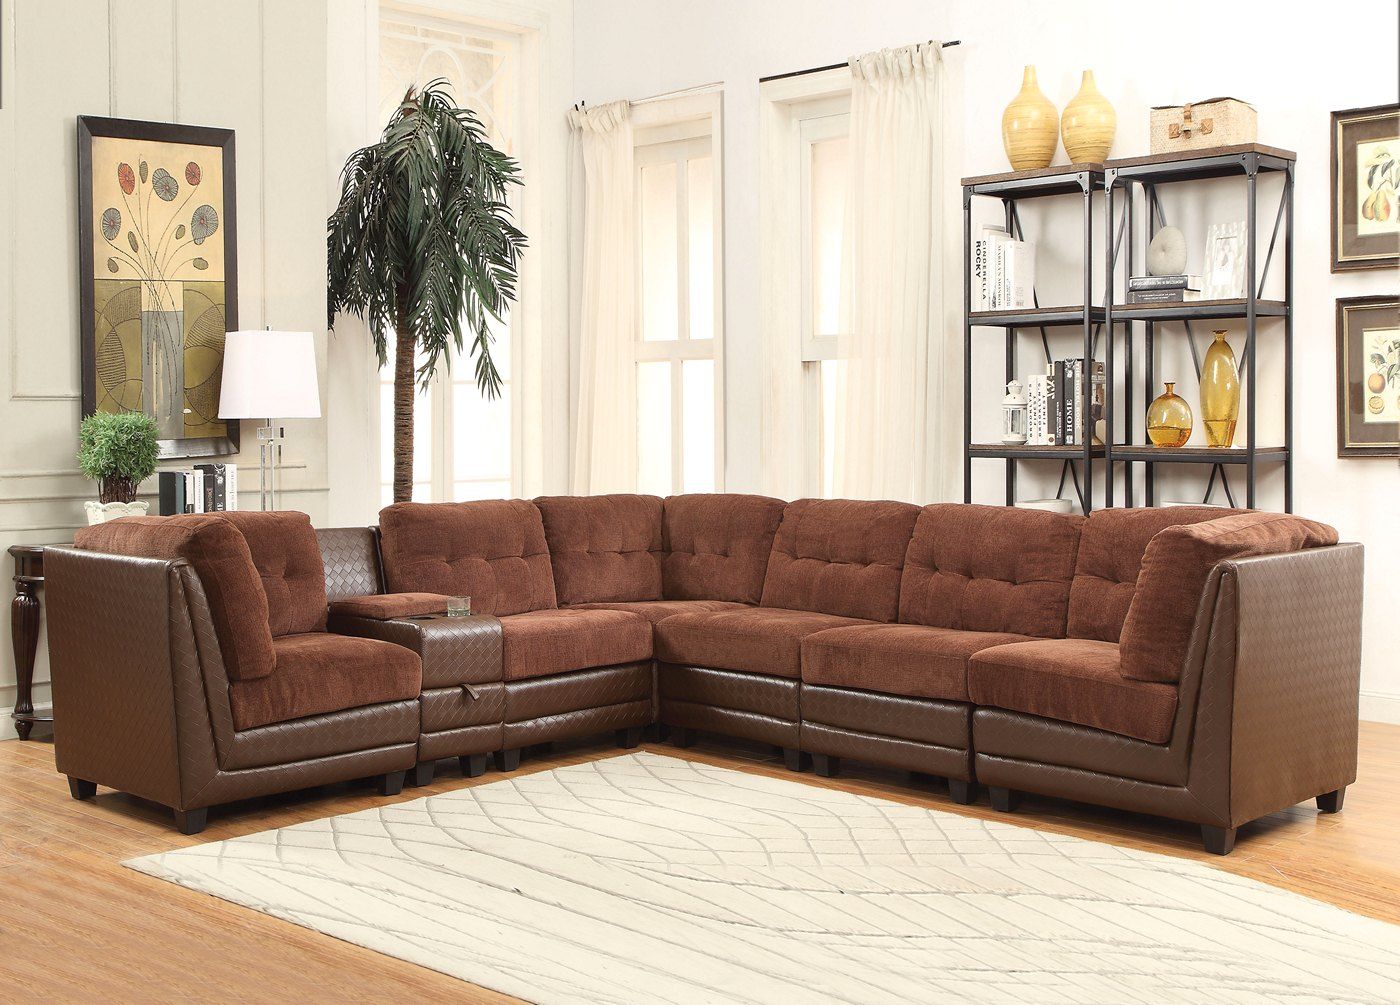 Valen 7 Pc Casual Modular Sectional Sofa In Brown Chenille Inside Paul Modular Sectional Sofas Blue (View 15 of 15)